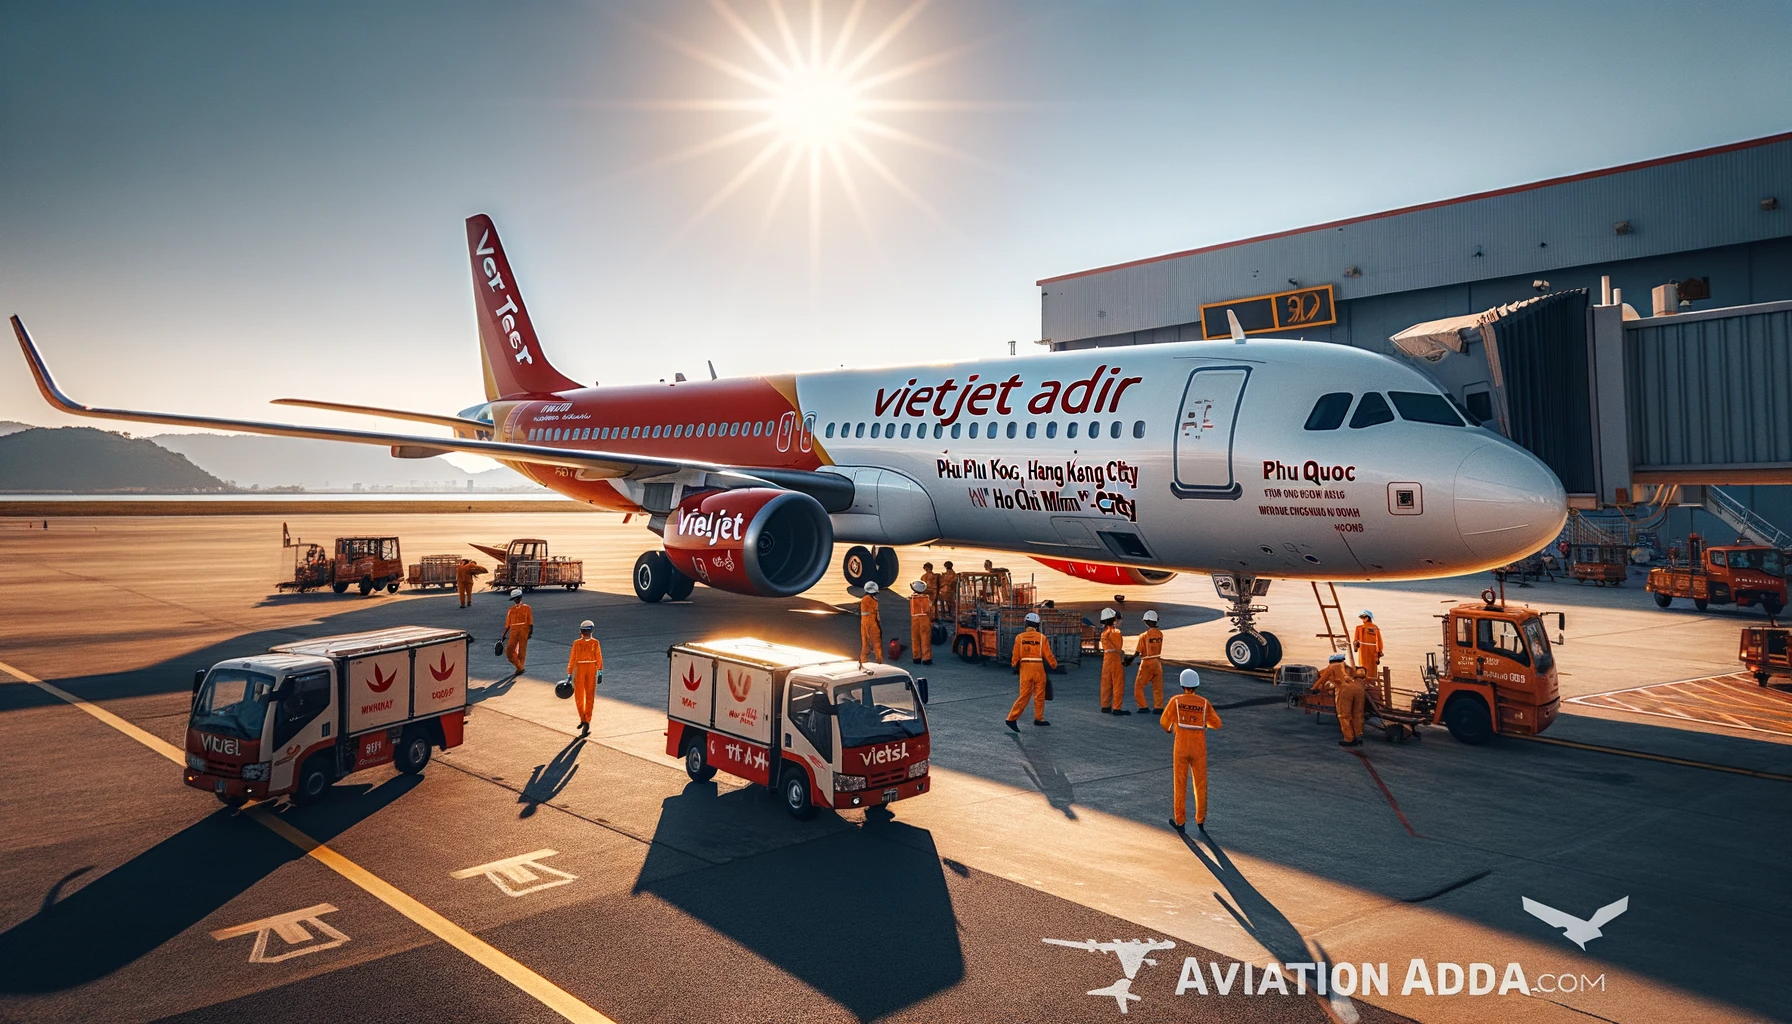 VIETJET AIR aircraft on the tarmac during daytime with the sun shining brightly. Ground crew can be seen working around the plane